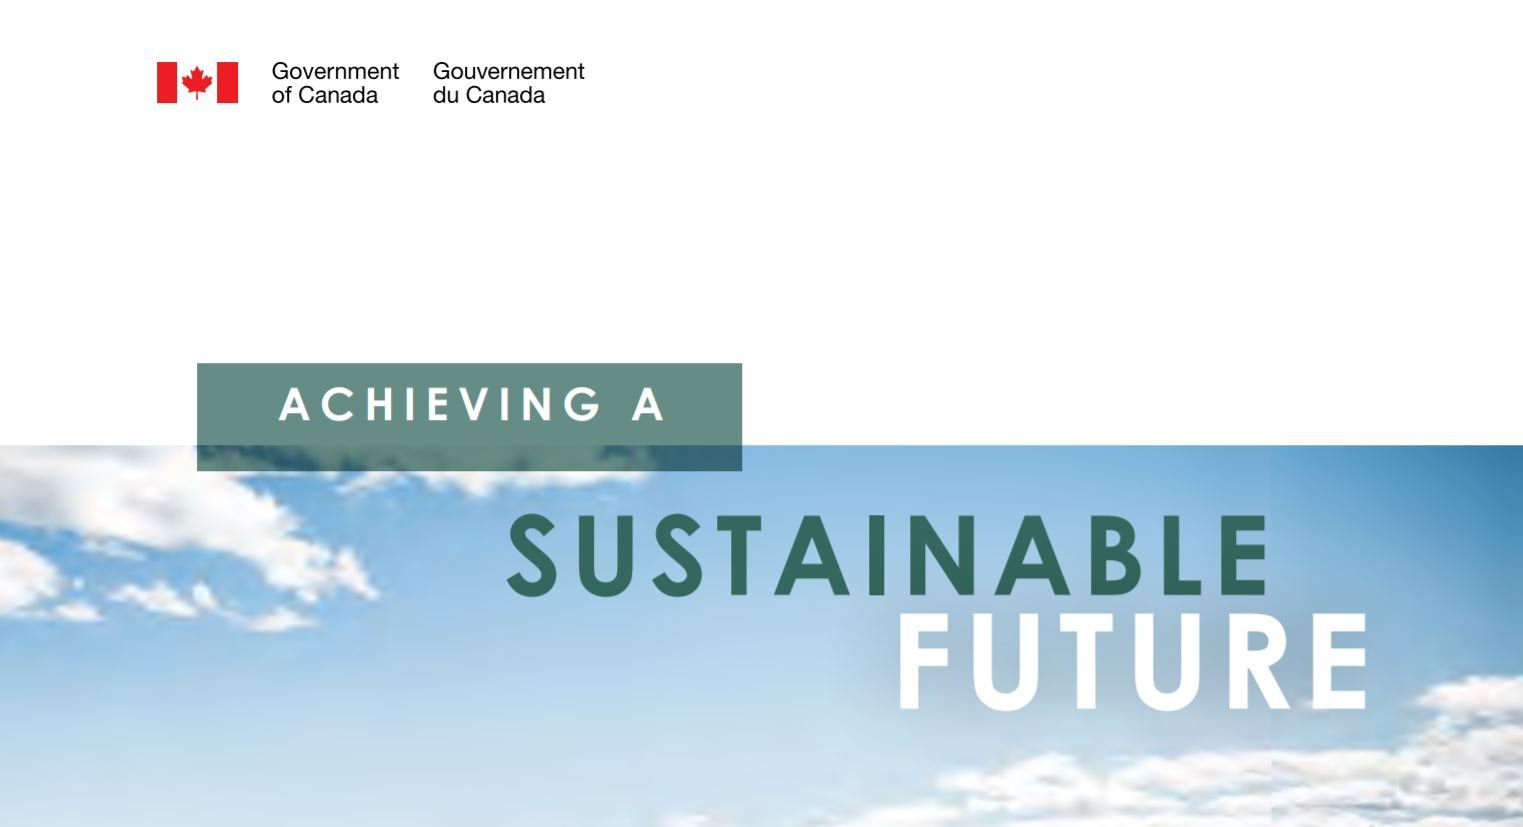 Achieving a Sustainable Future: A Federal Sustainable Development Strategy for Canada 2019-2022